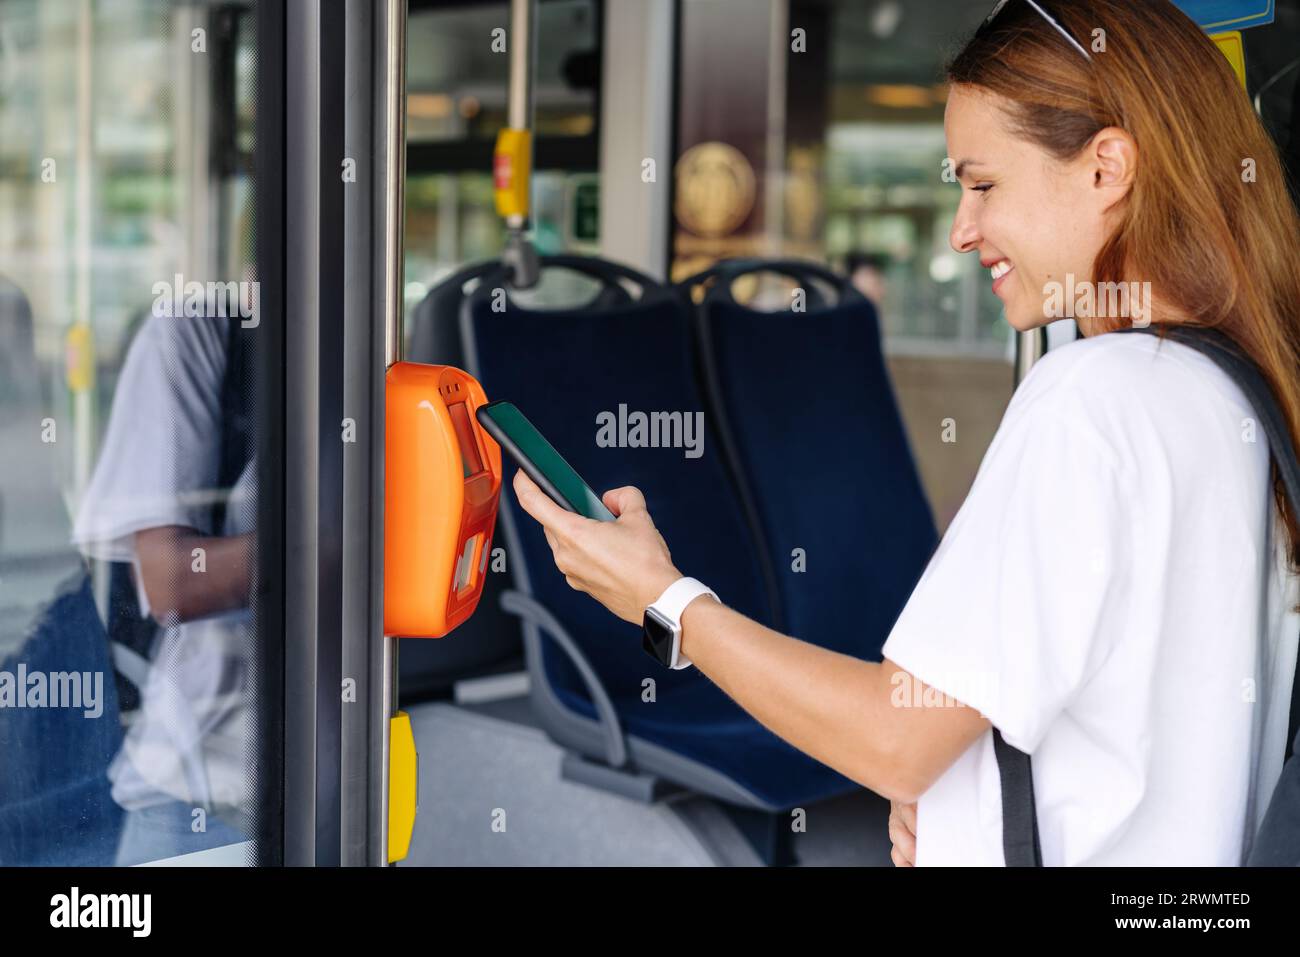 Attractive young woman paying shuttle bus using her mobile phone, contactless technology of payment in public transport. Stock Photo